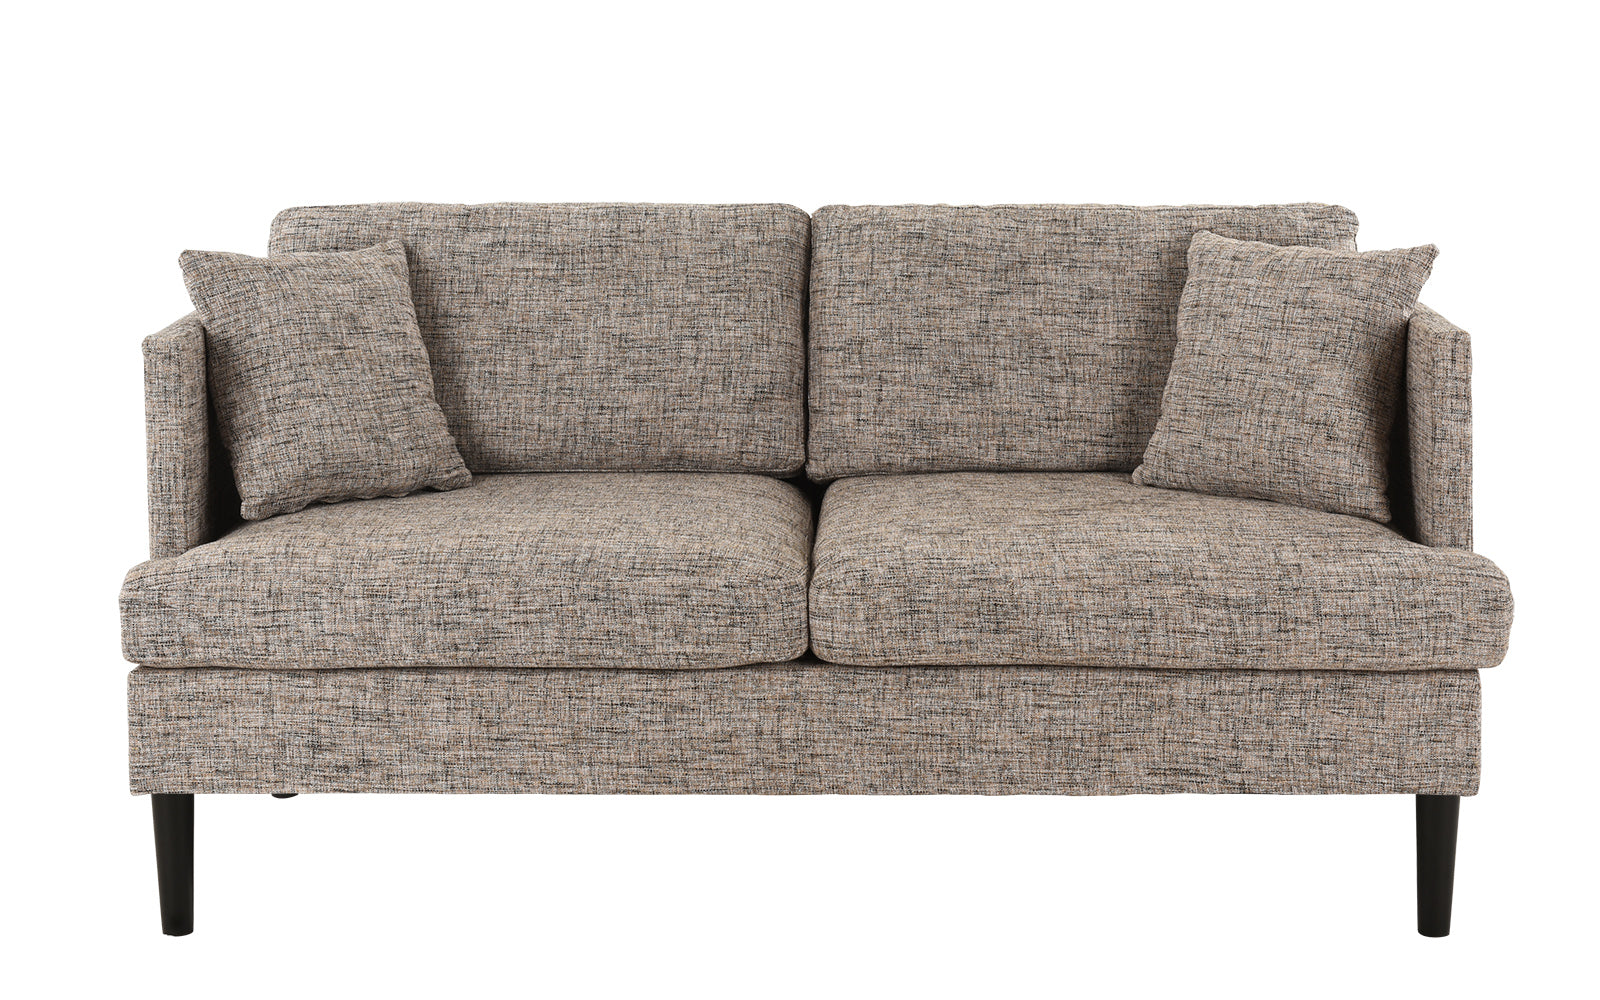 EXP290-2S-ASBR August Modern Loveseat Sofa with Wooden Legs sku EXP290-2S-ASBR